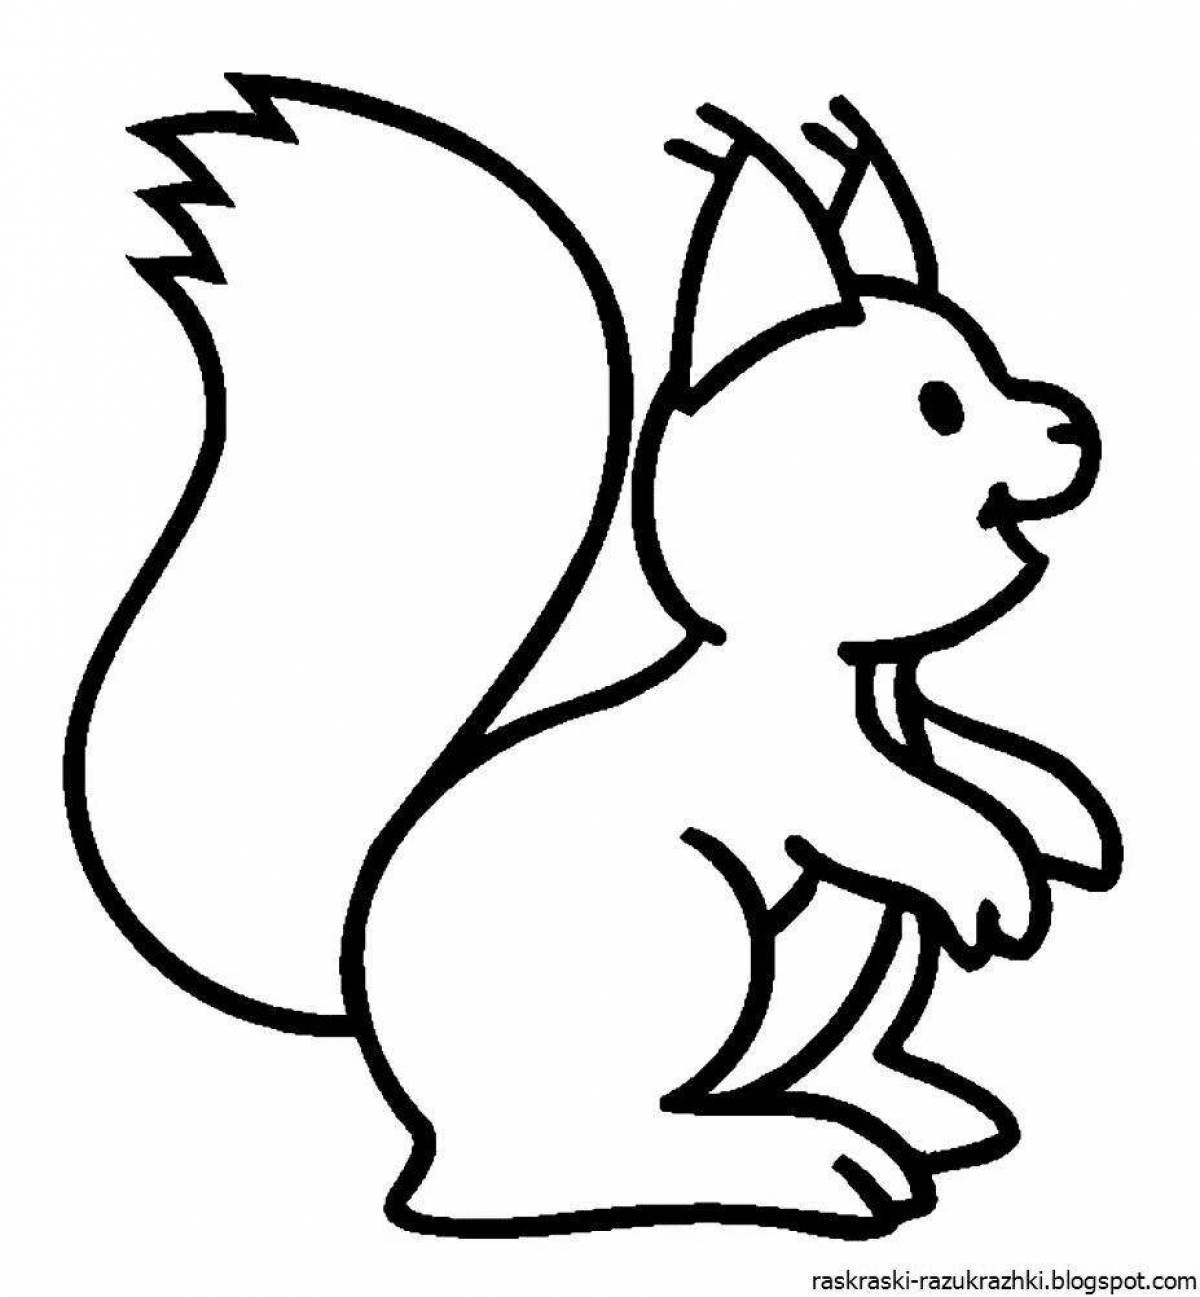 Cute squirrel drawing for kids